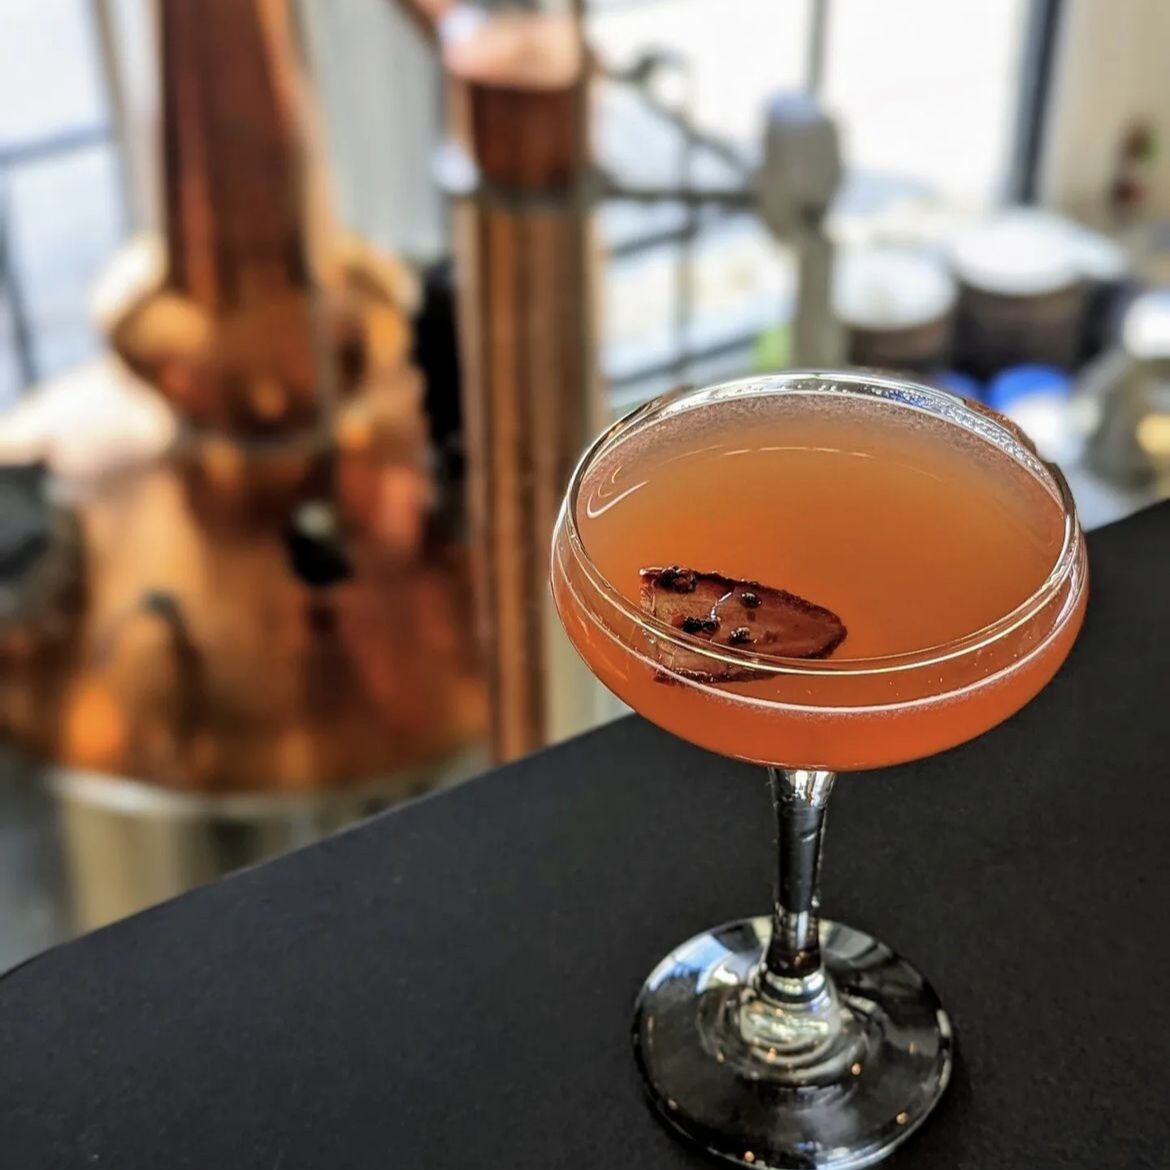 A photo of The Offensive Strawberry Daquiri cocktail on a ledge overlooking the manufacturing floor at Maggie's Farm Rum's distillery.